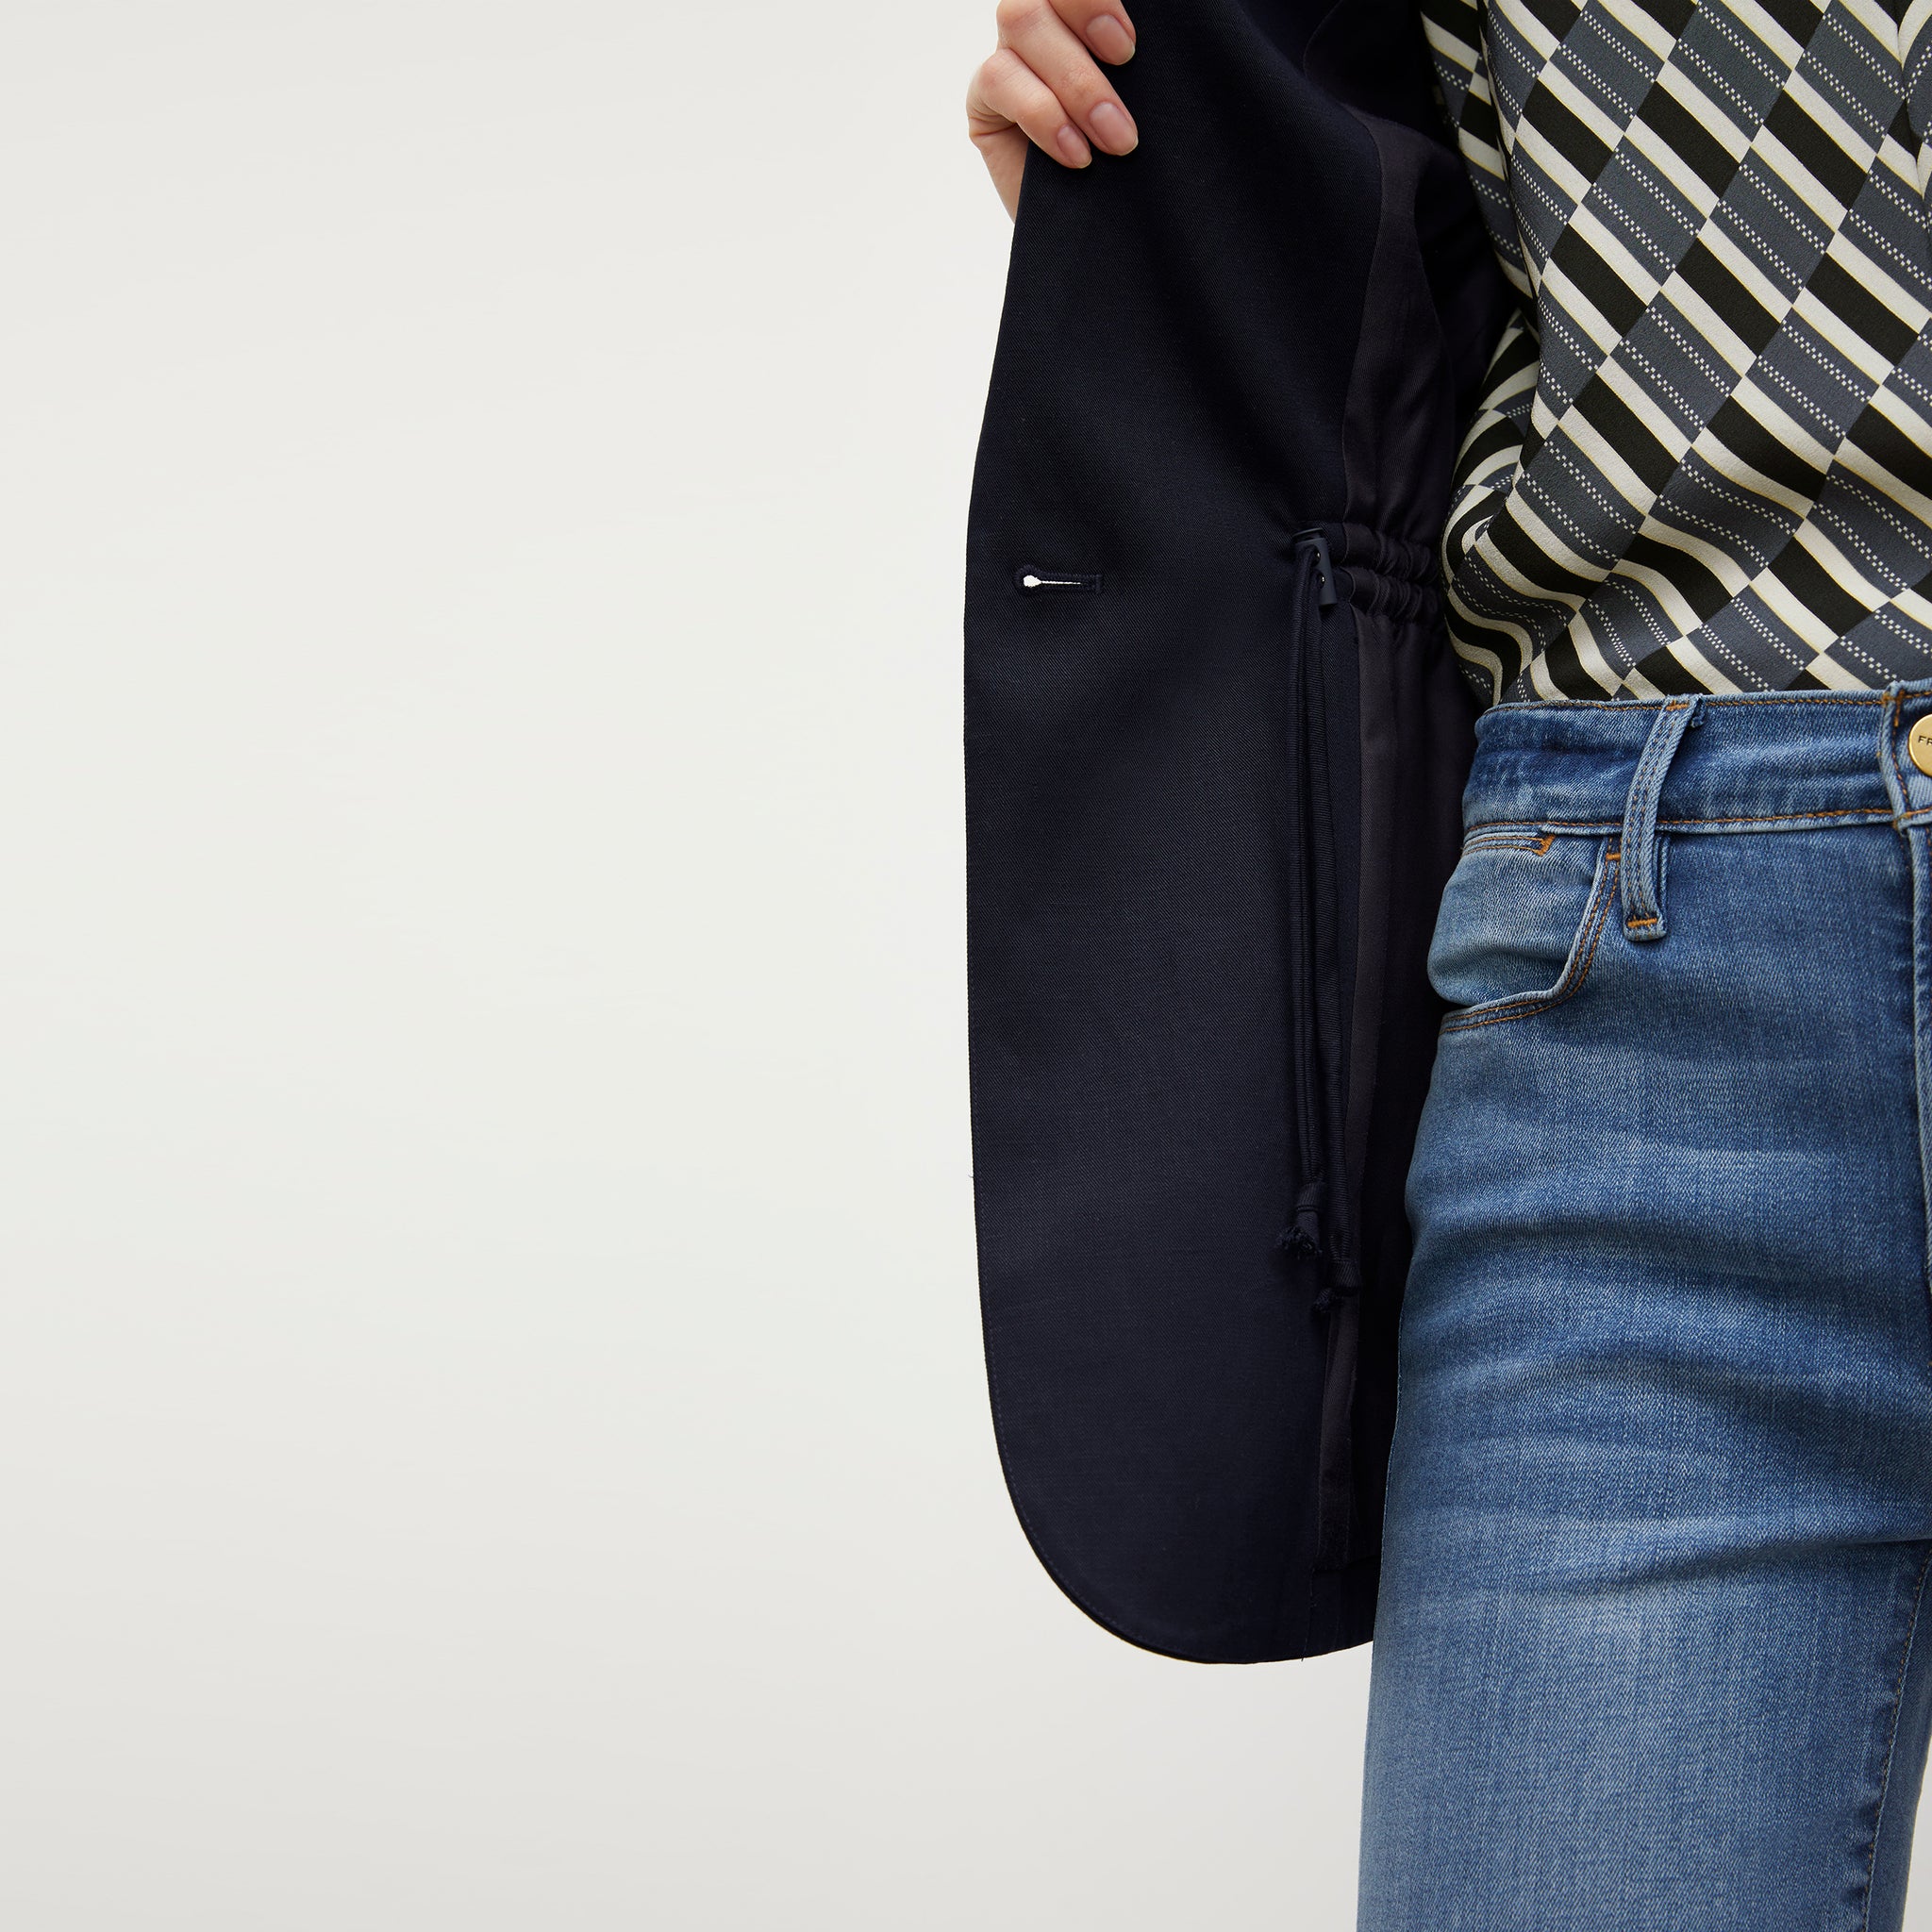 Detail image of a woman wearing the Hyo Jacket - Everyday Twill in Night